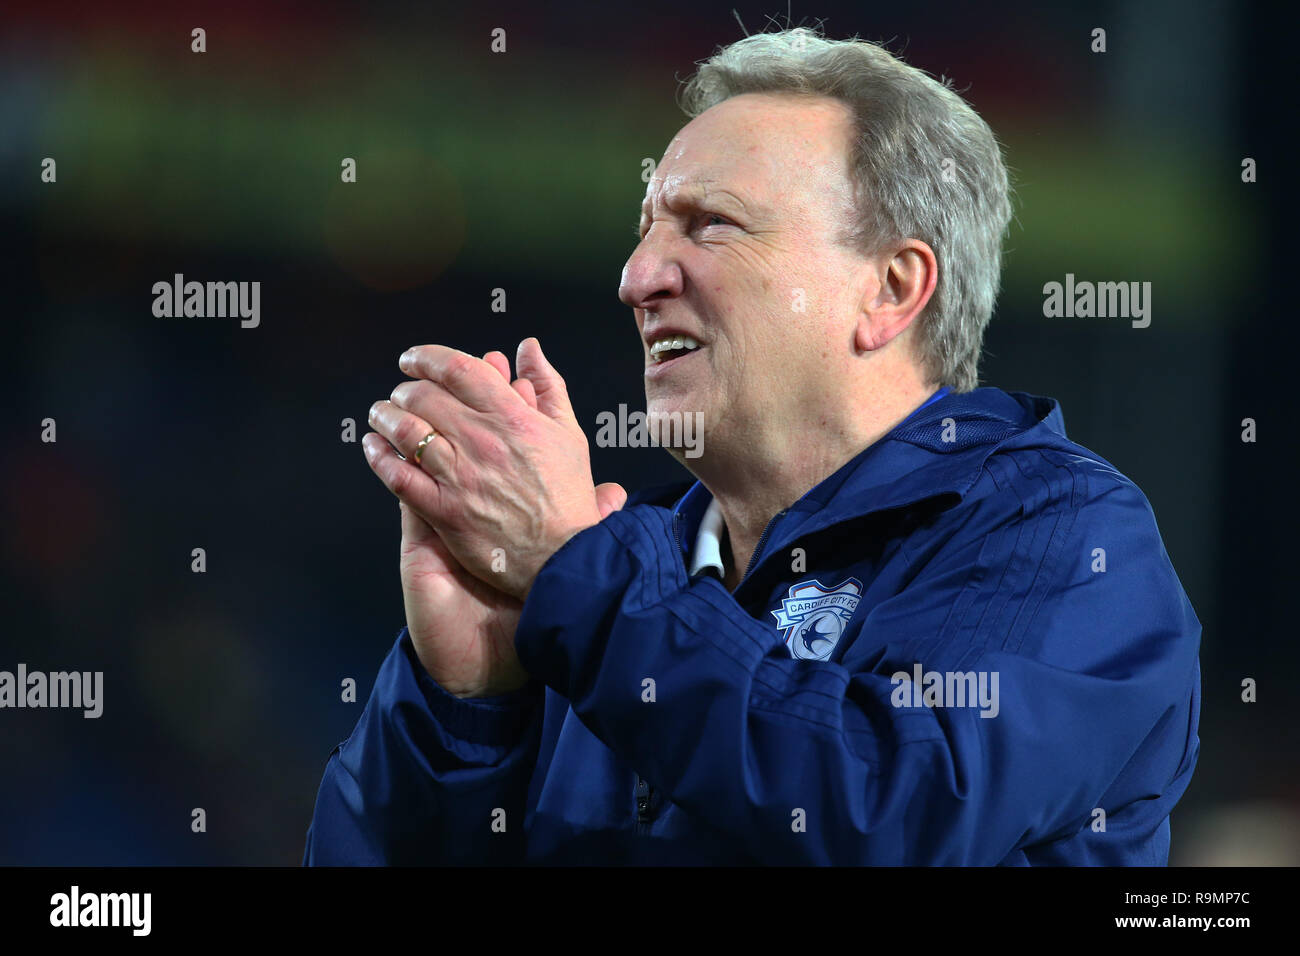 London, England - 26 December, 2018 Cardiff City manager Neil Warnock  during English Premier League between Crystal Palace and Cardiff City at Selhurst Park stadium , London, England on 26 Dec 2018. Credit Action Foto Sport  FA Premier League and Football League images are subject to DataCo Licence. Editorial use ONLY. No print sales. No personal use sales. NO UNPAID USE Stock Photo